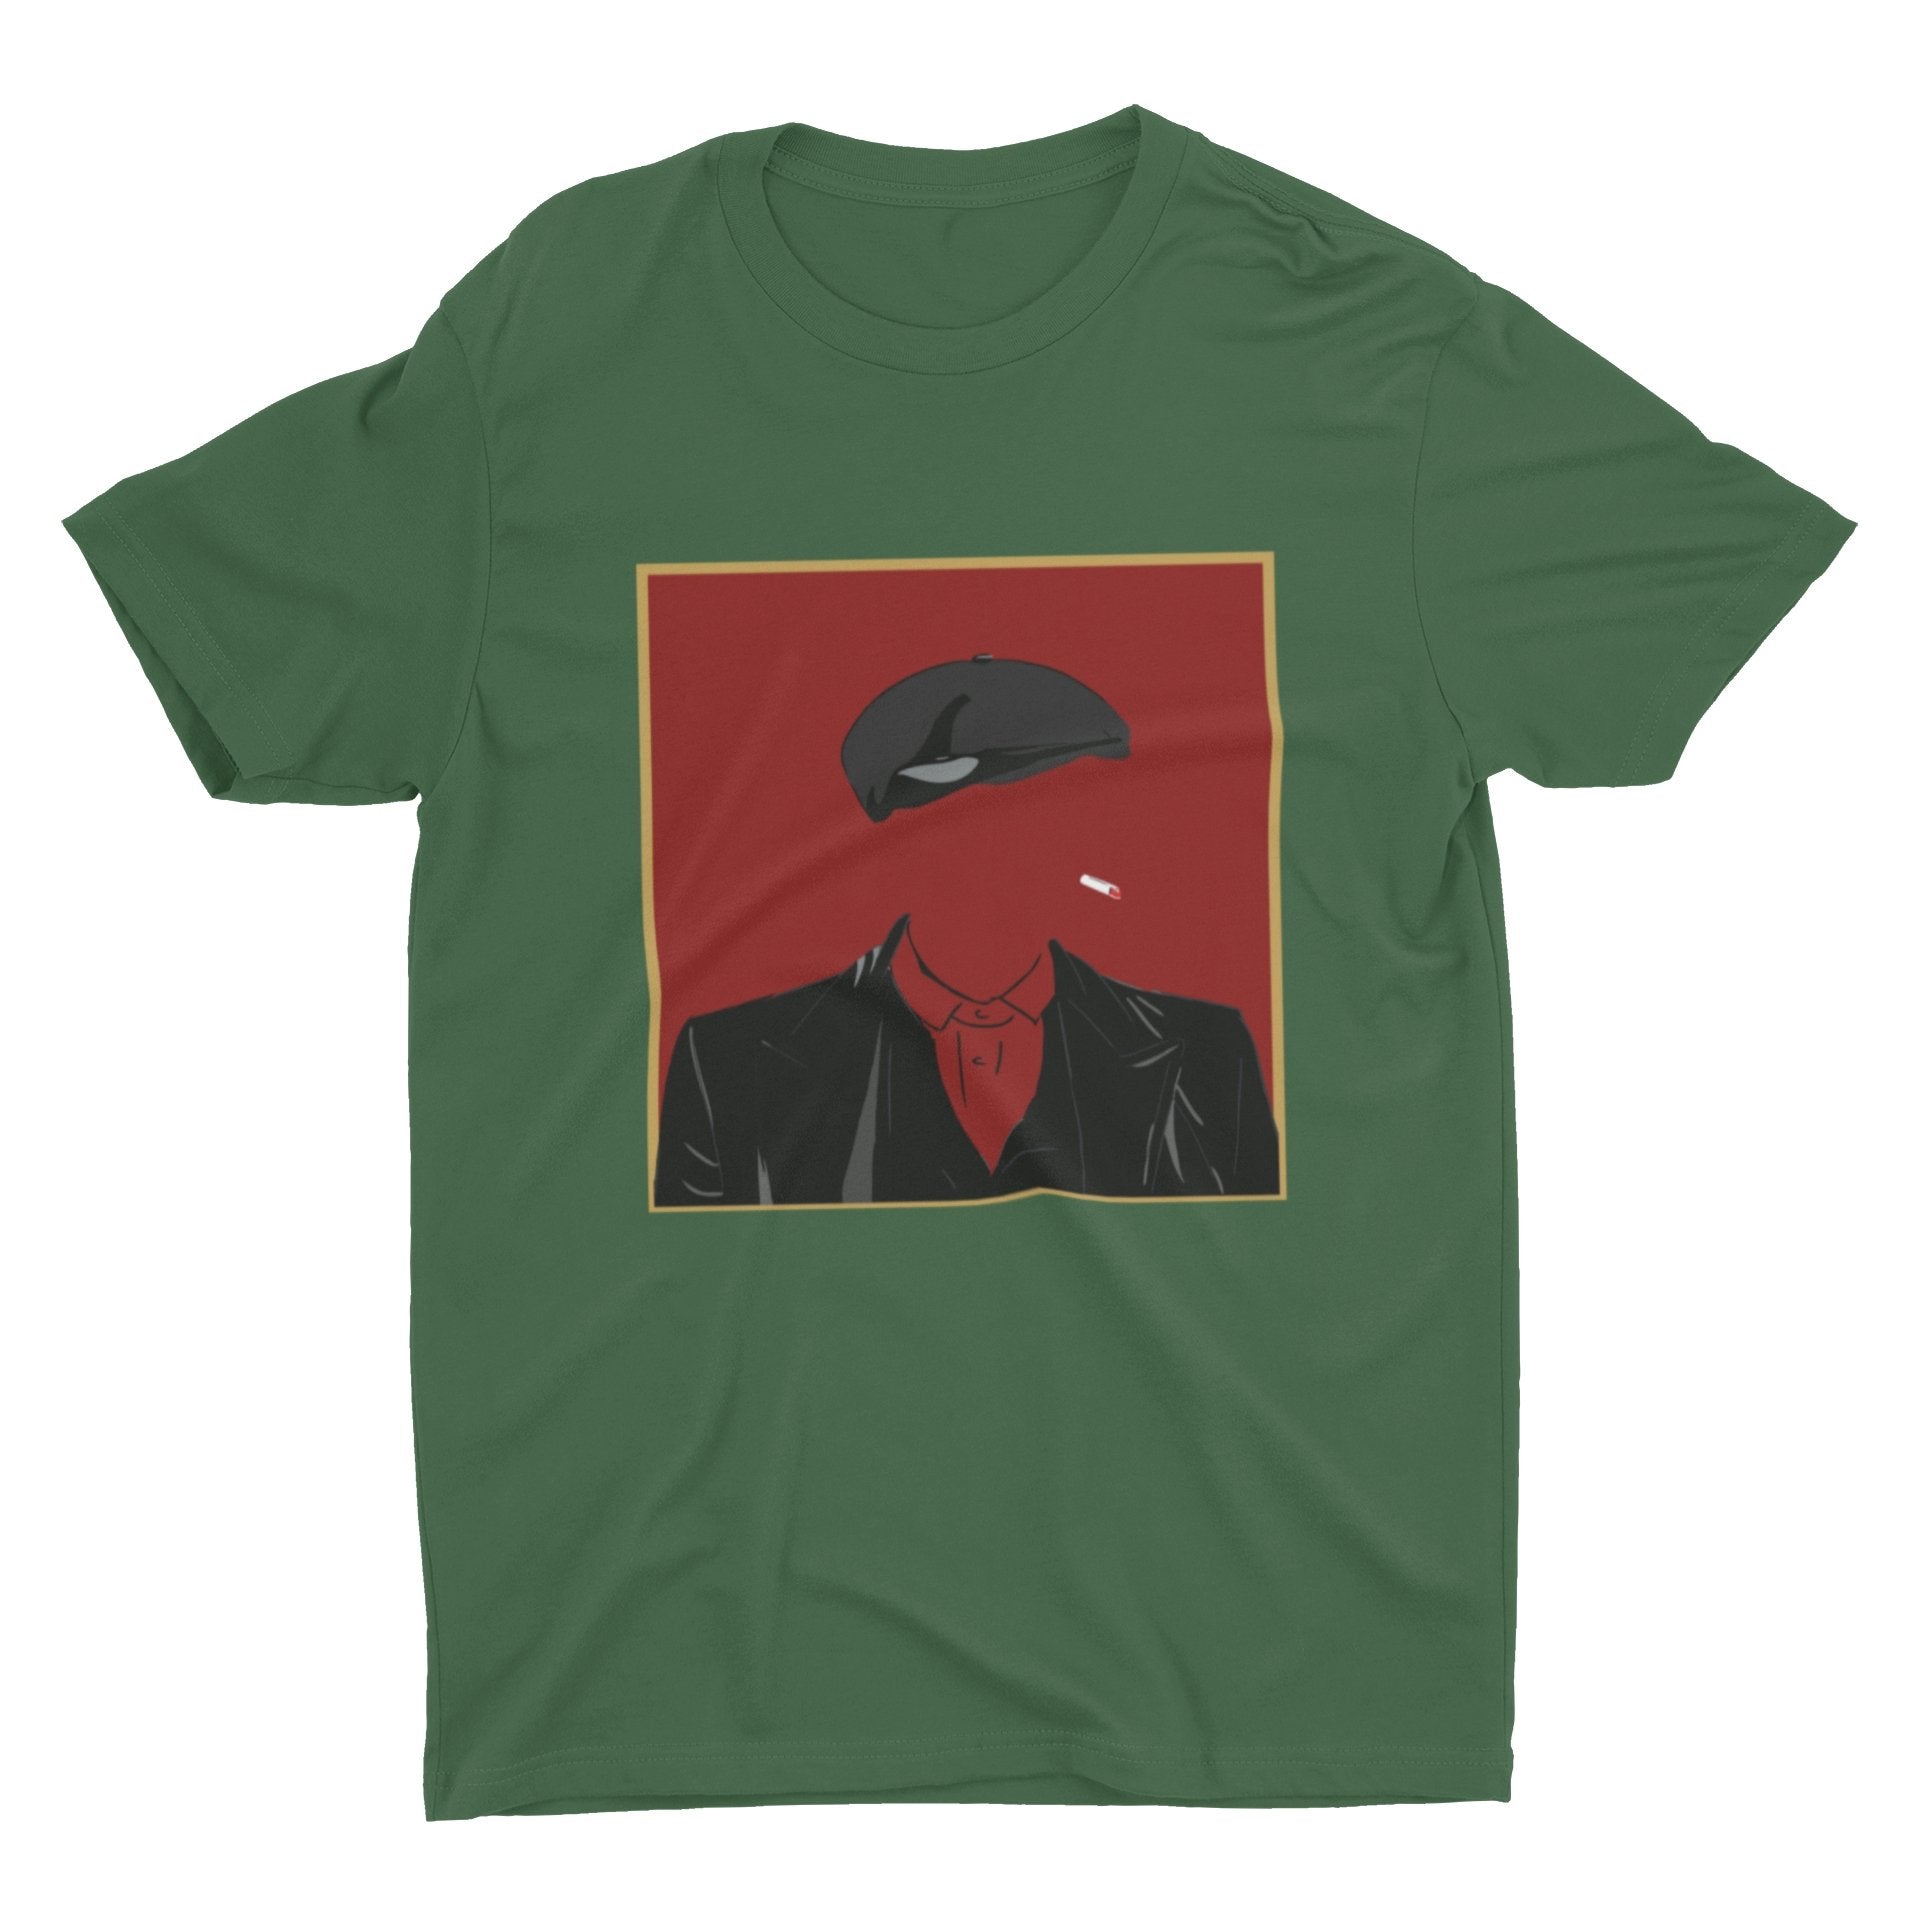 thelegalgang,Tommy Shelby Portrait - The Peaky Blinders T-shirt,.